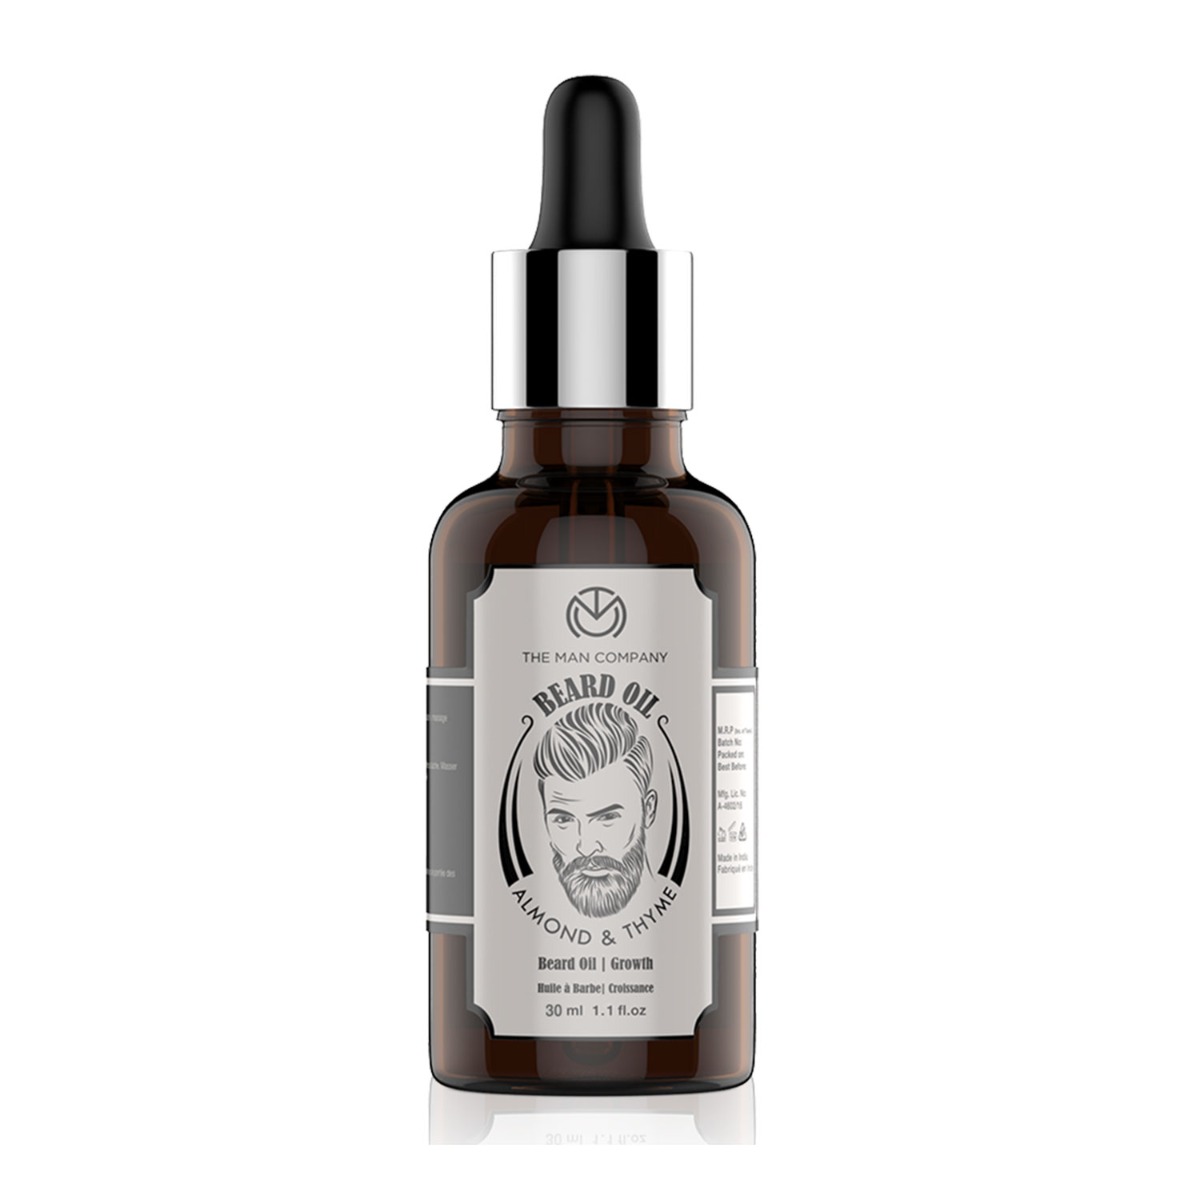 The Man Company Men Mooch and Beard Oil with Almond and Thyme, 30 ml